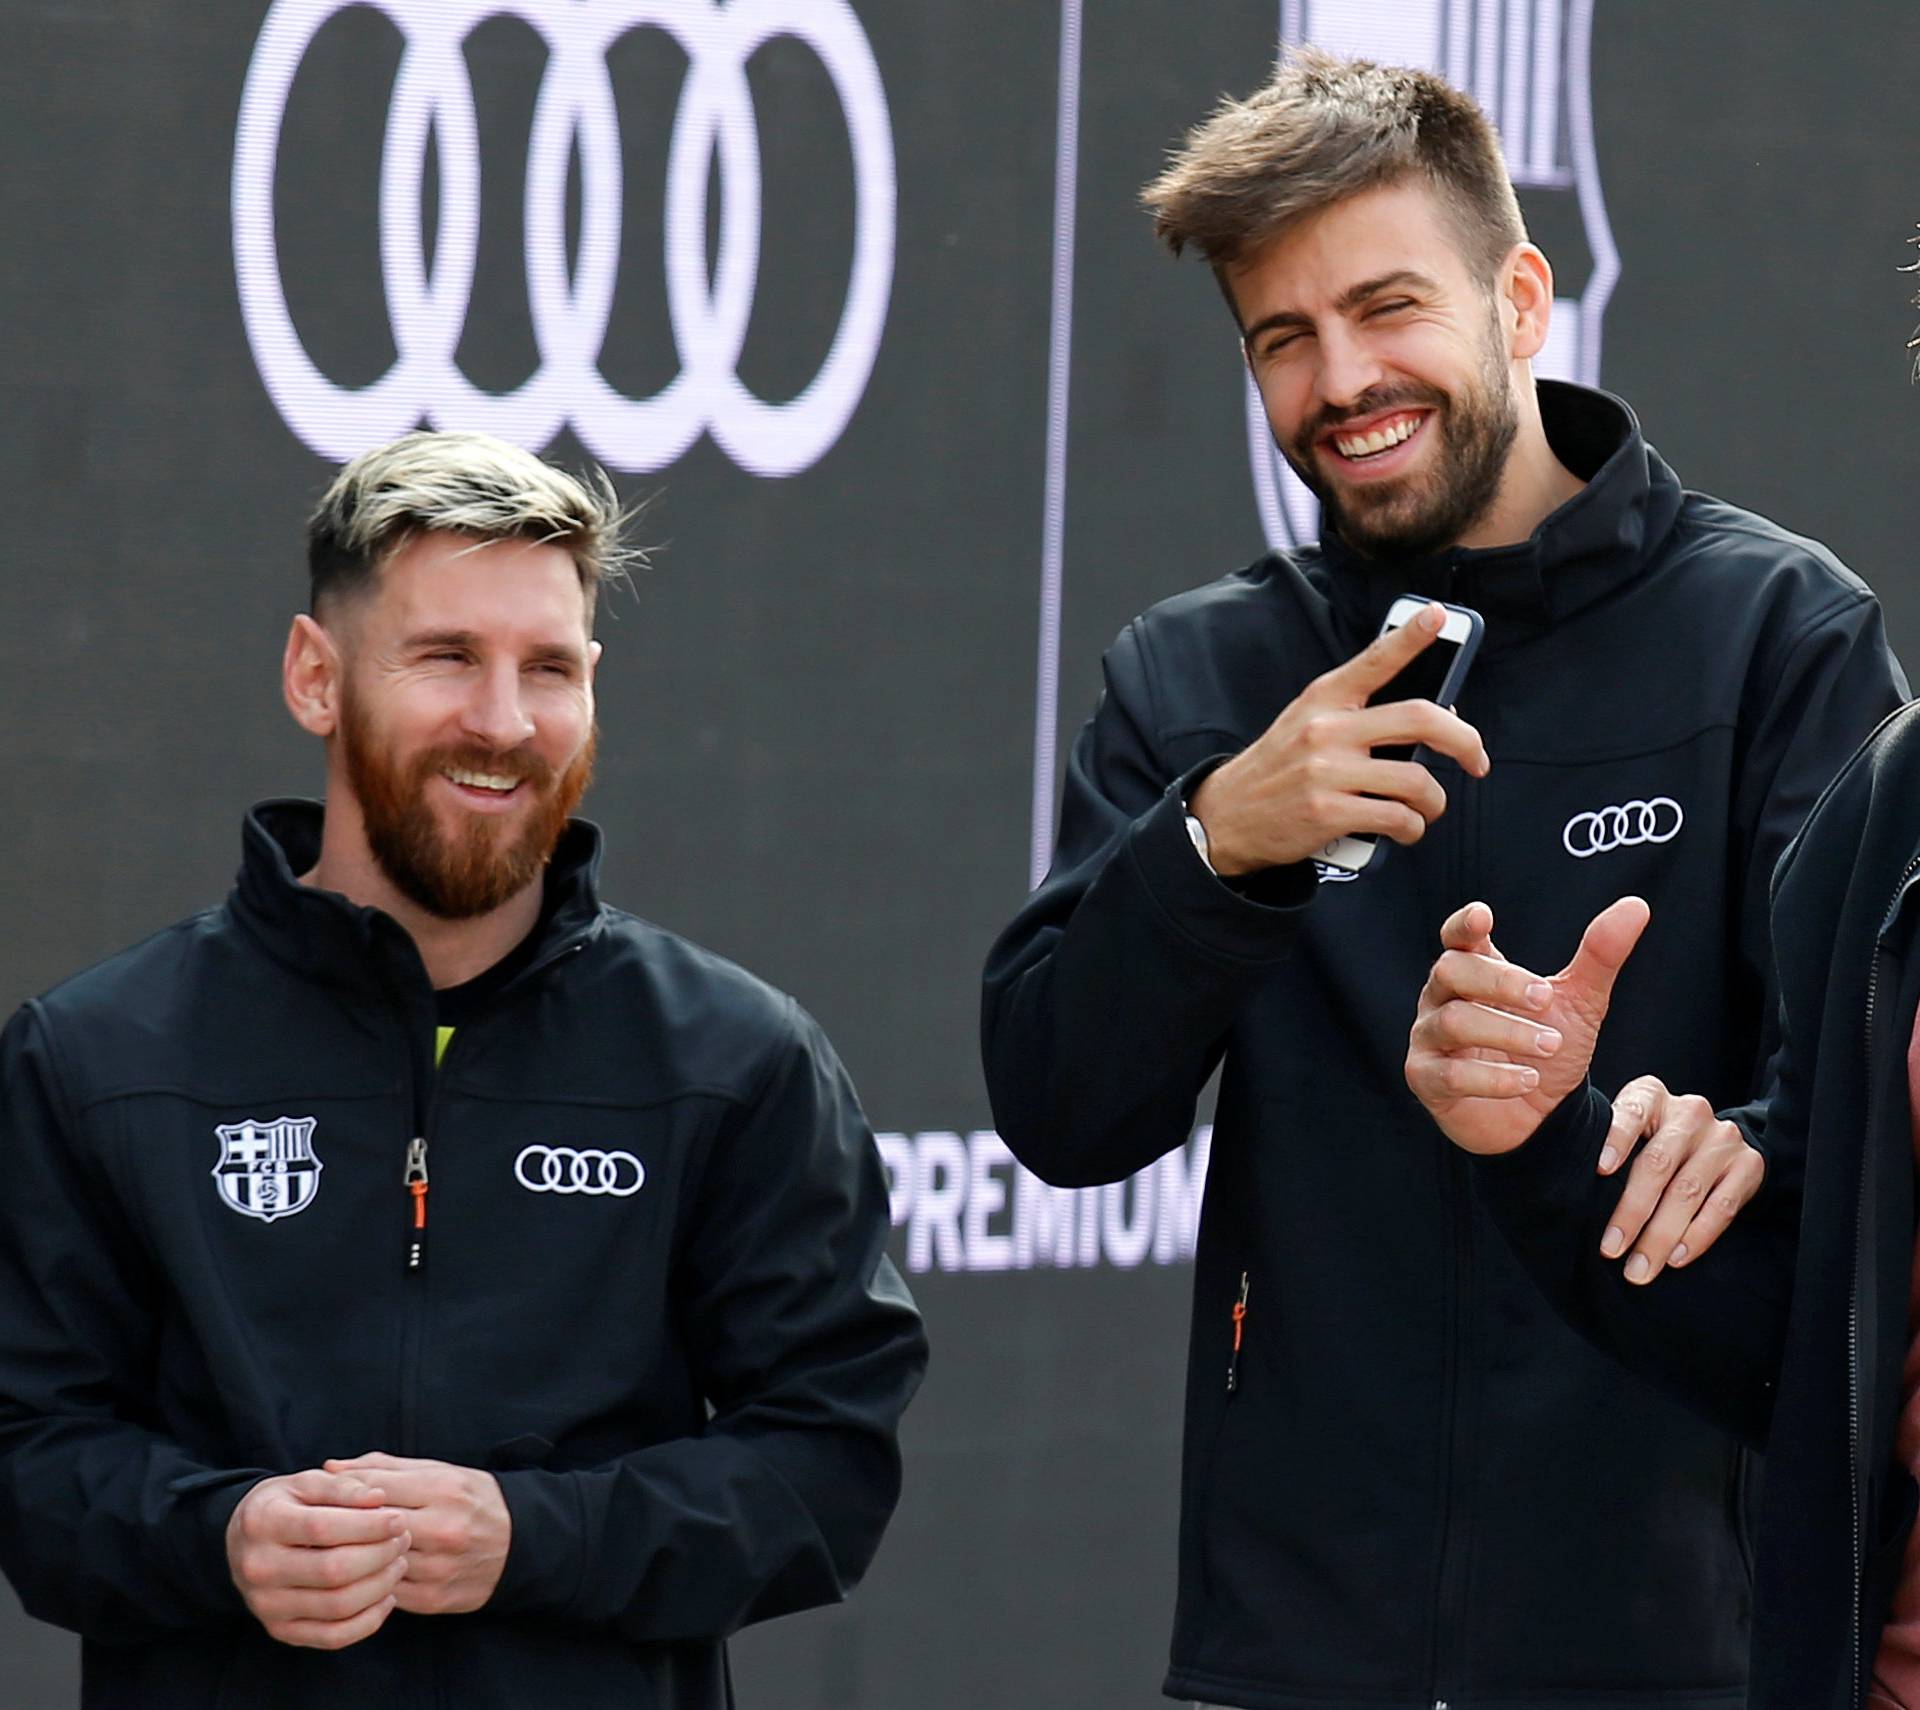 Barcelona's soccer players Messi and Pique take part in a commercial event near Camp Nou stadium in Barcelona